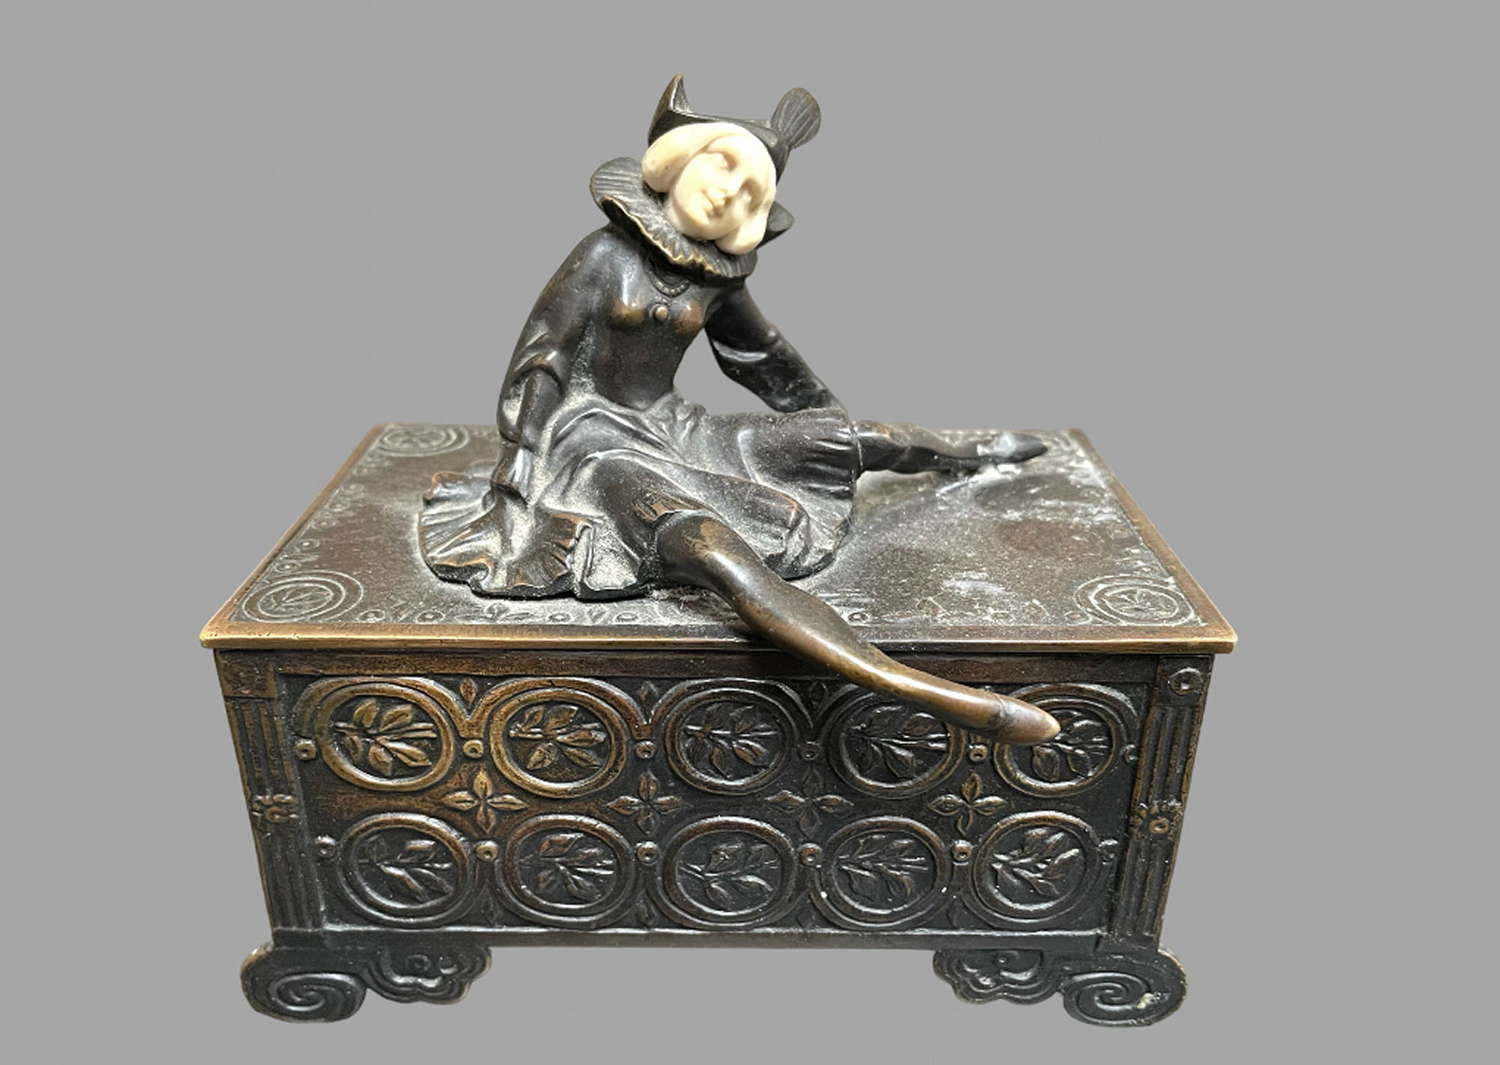 An Attractive Art Nouveau Bronze Box with Harlequin